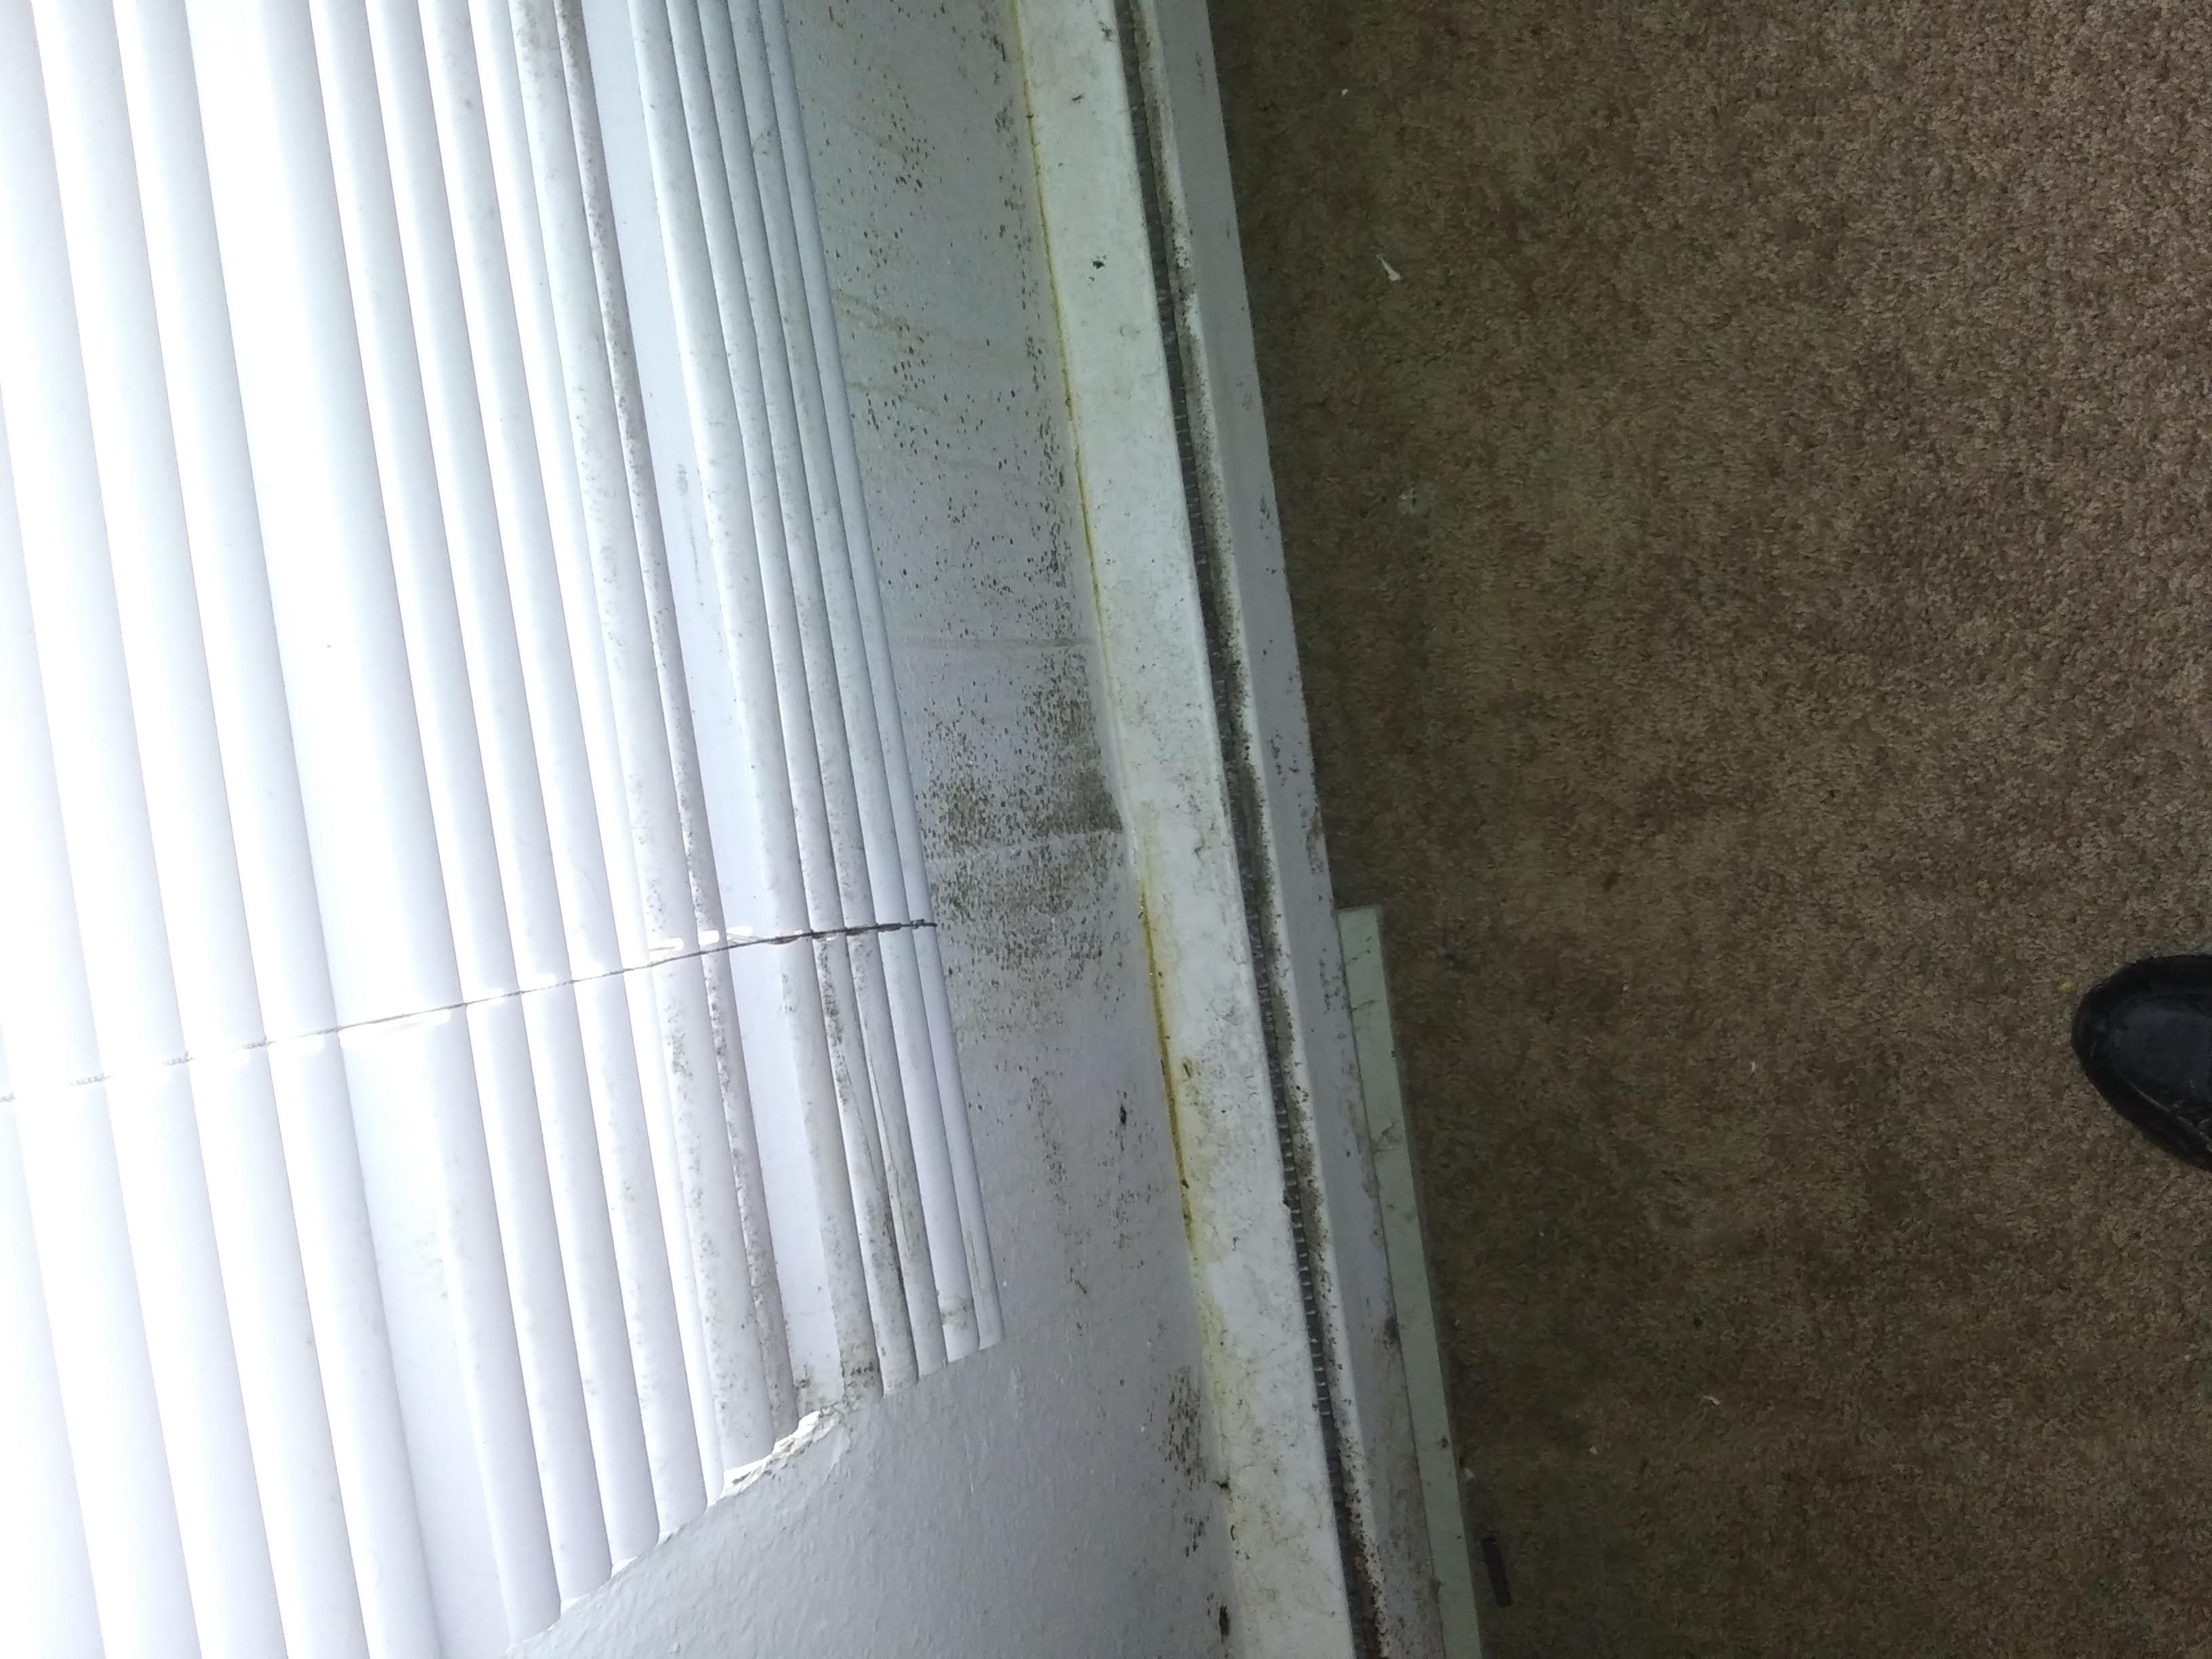 mold on blinds despite bleaching every year